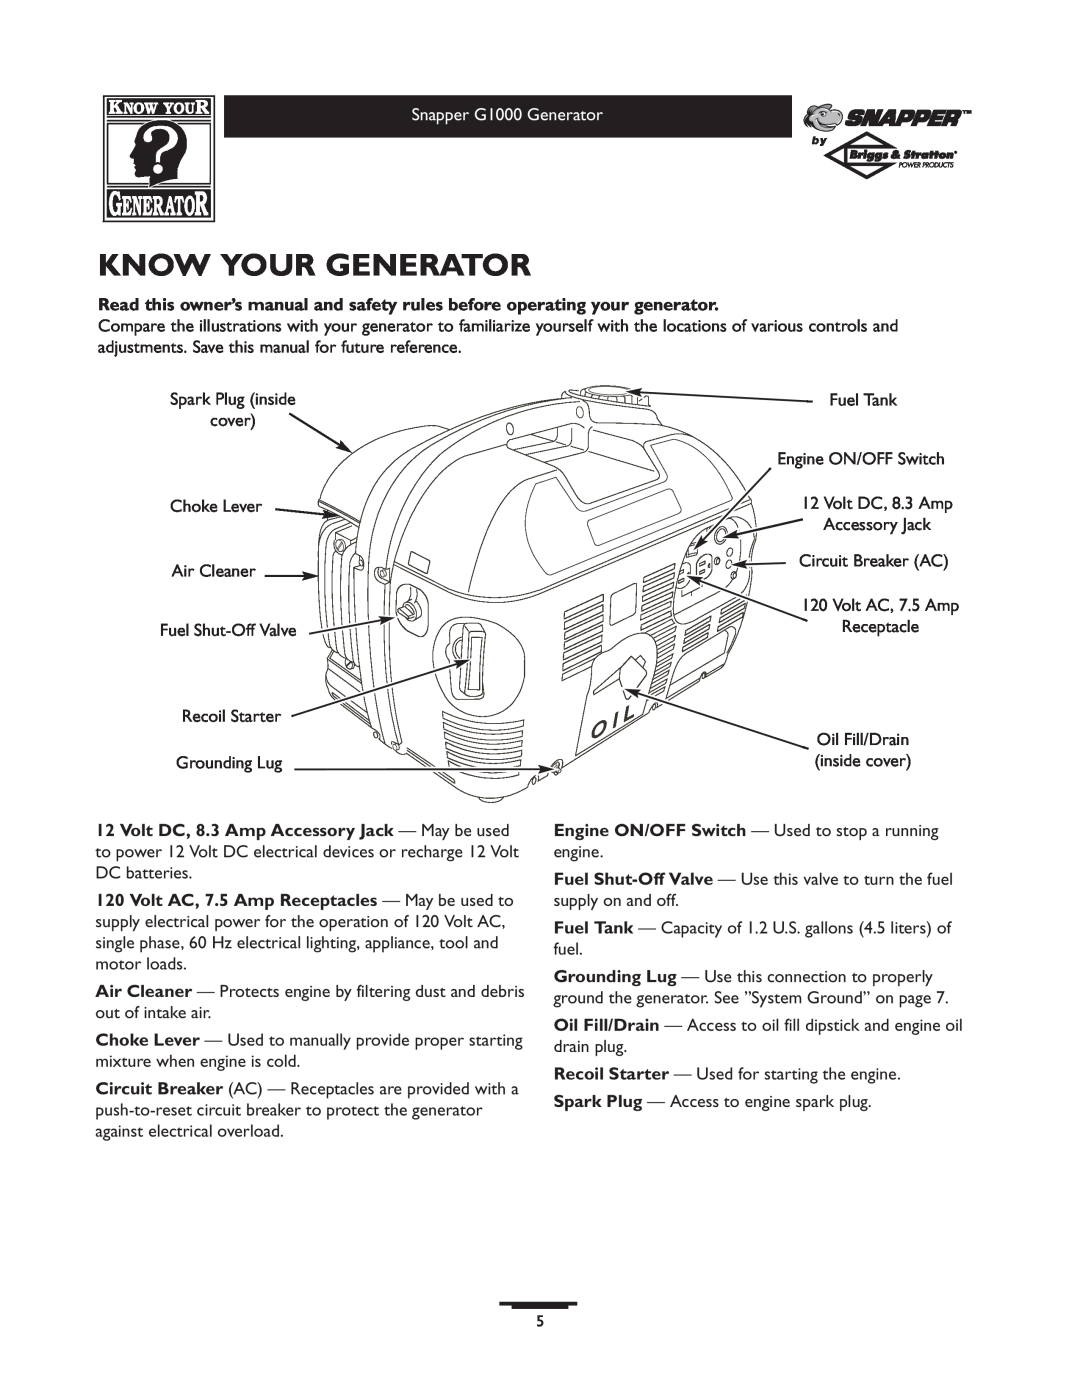 Snapper owner manual Know Your Generator, Engine ON/OFF Switch - Used to stop a running engine, Snapper G1000 Generator 